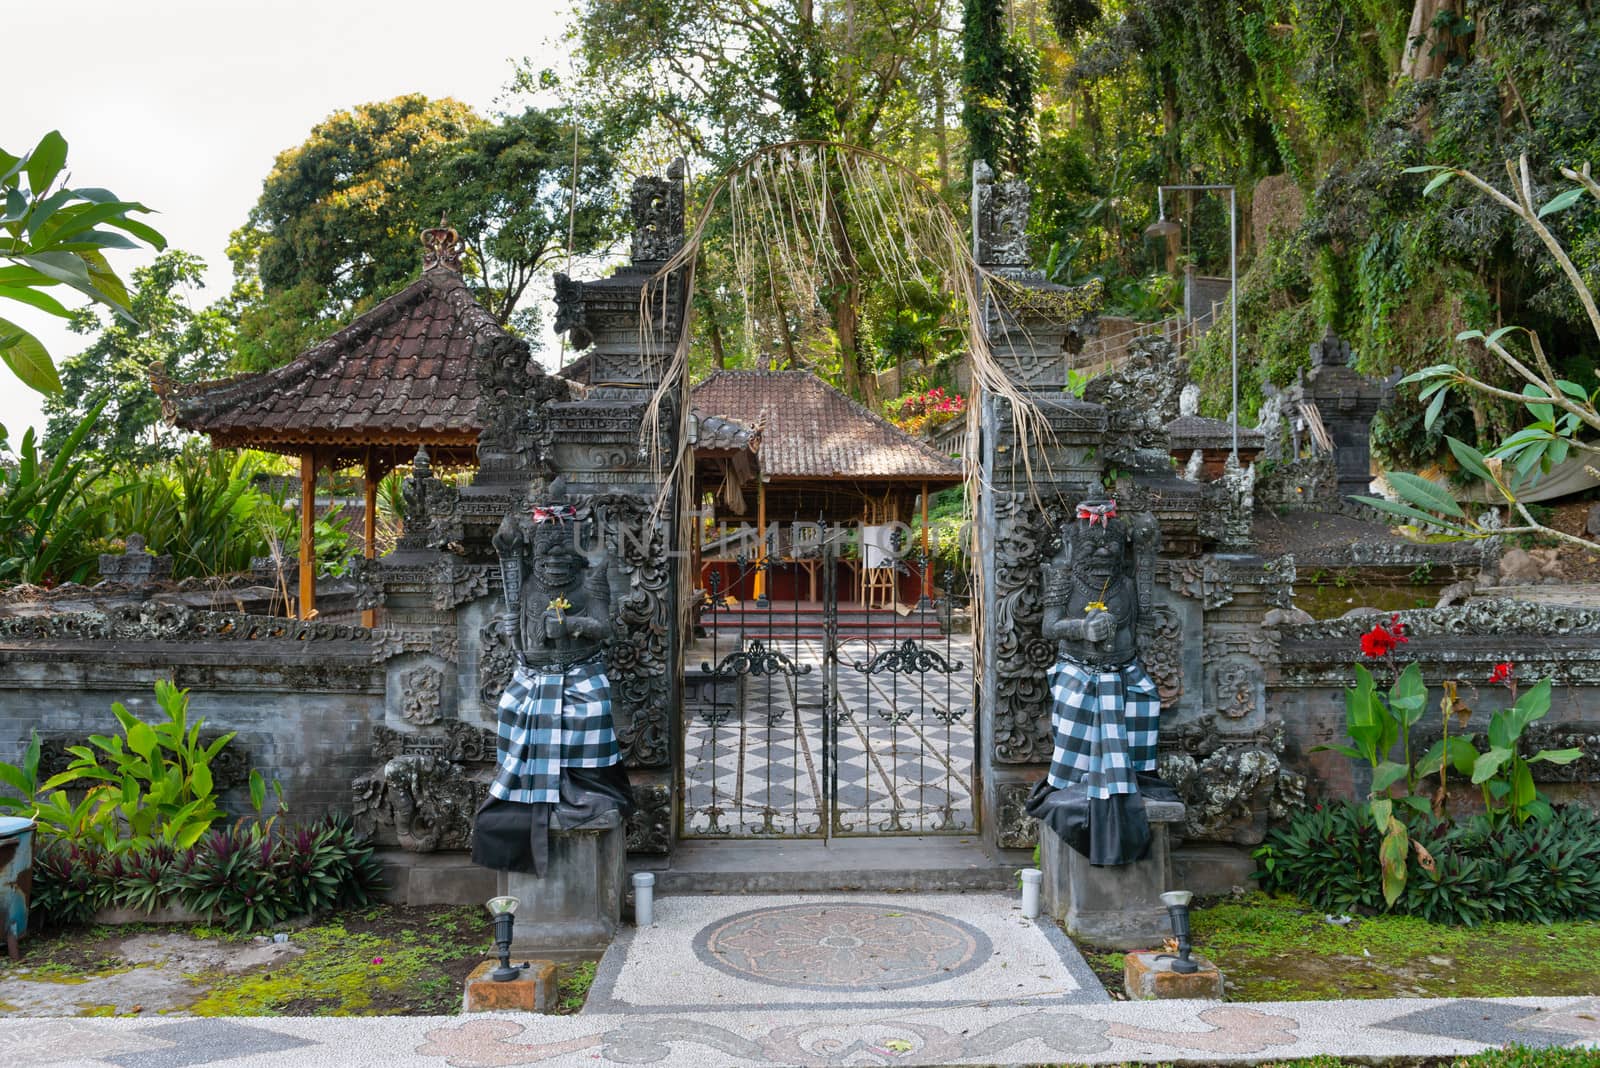 Traditional balinese architecture. Candi bentar split gate of a temple. 